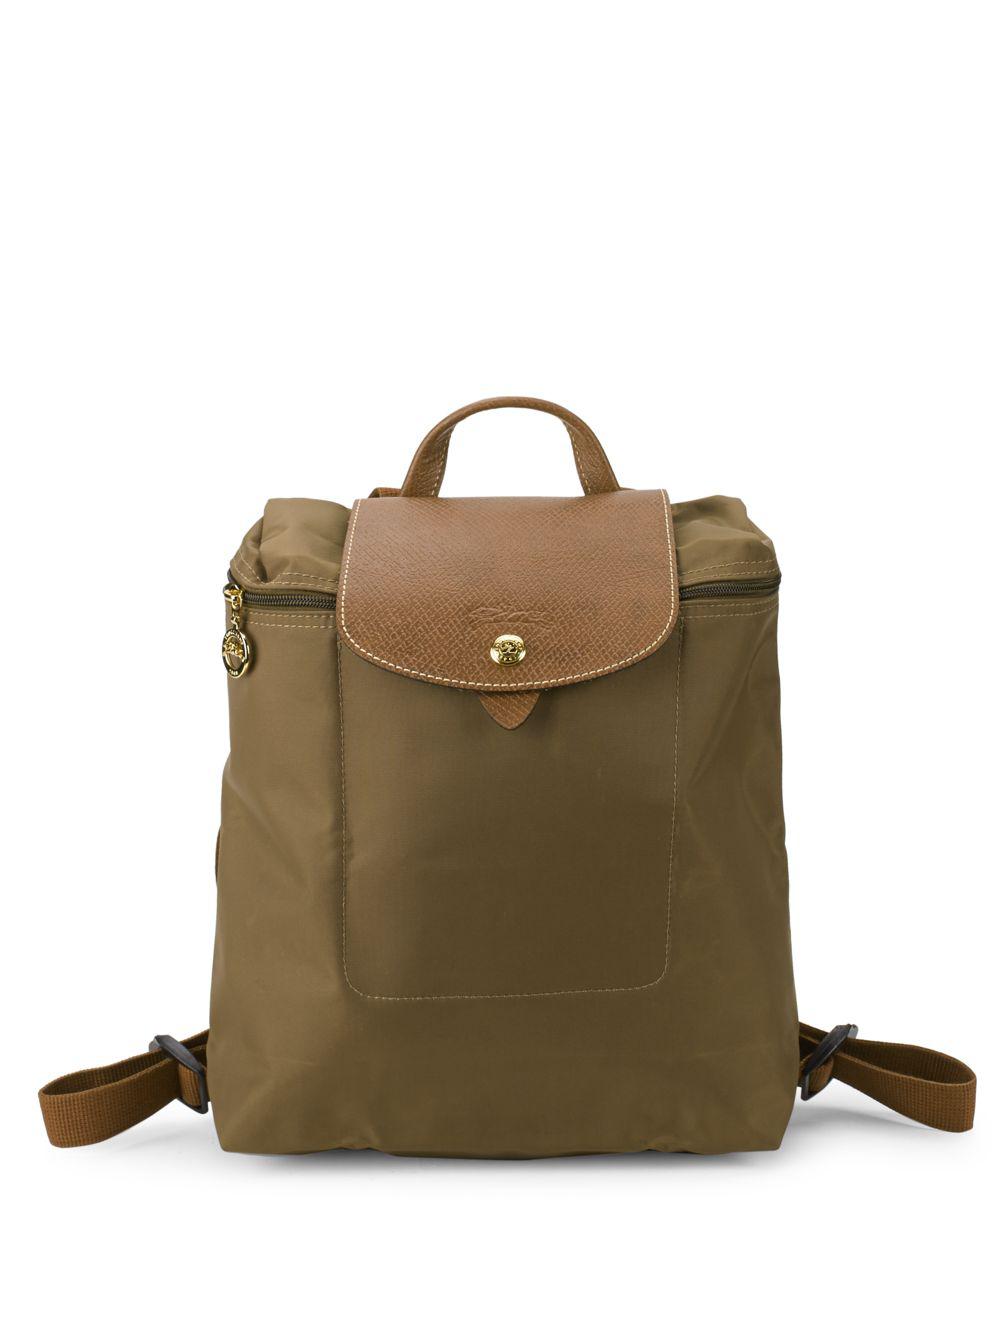 Longchamp Le Pliage Backpack in Natural | Lyst